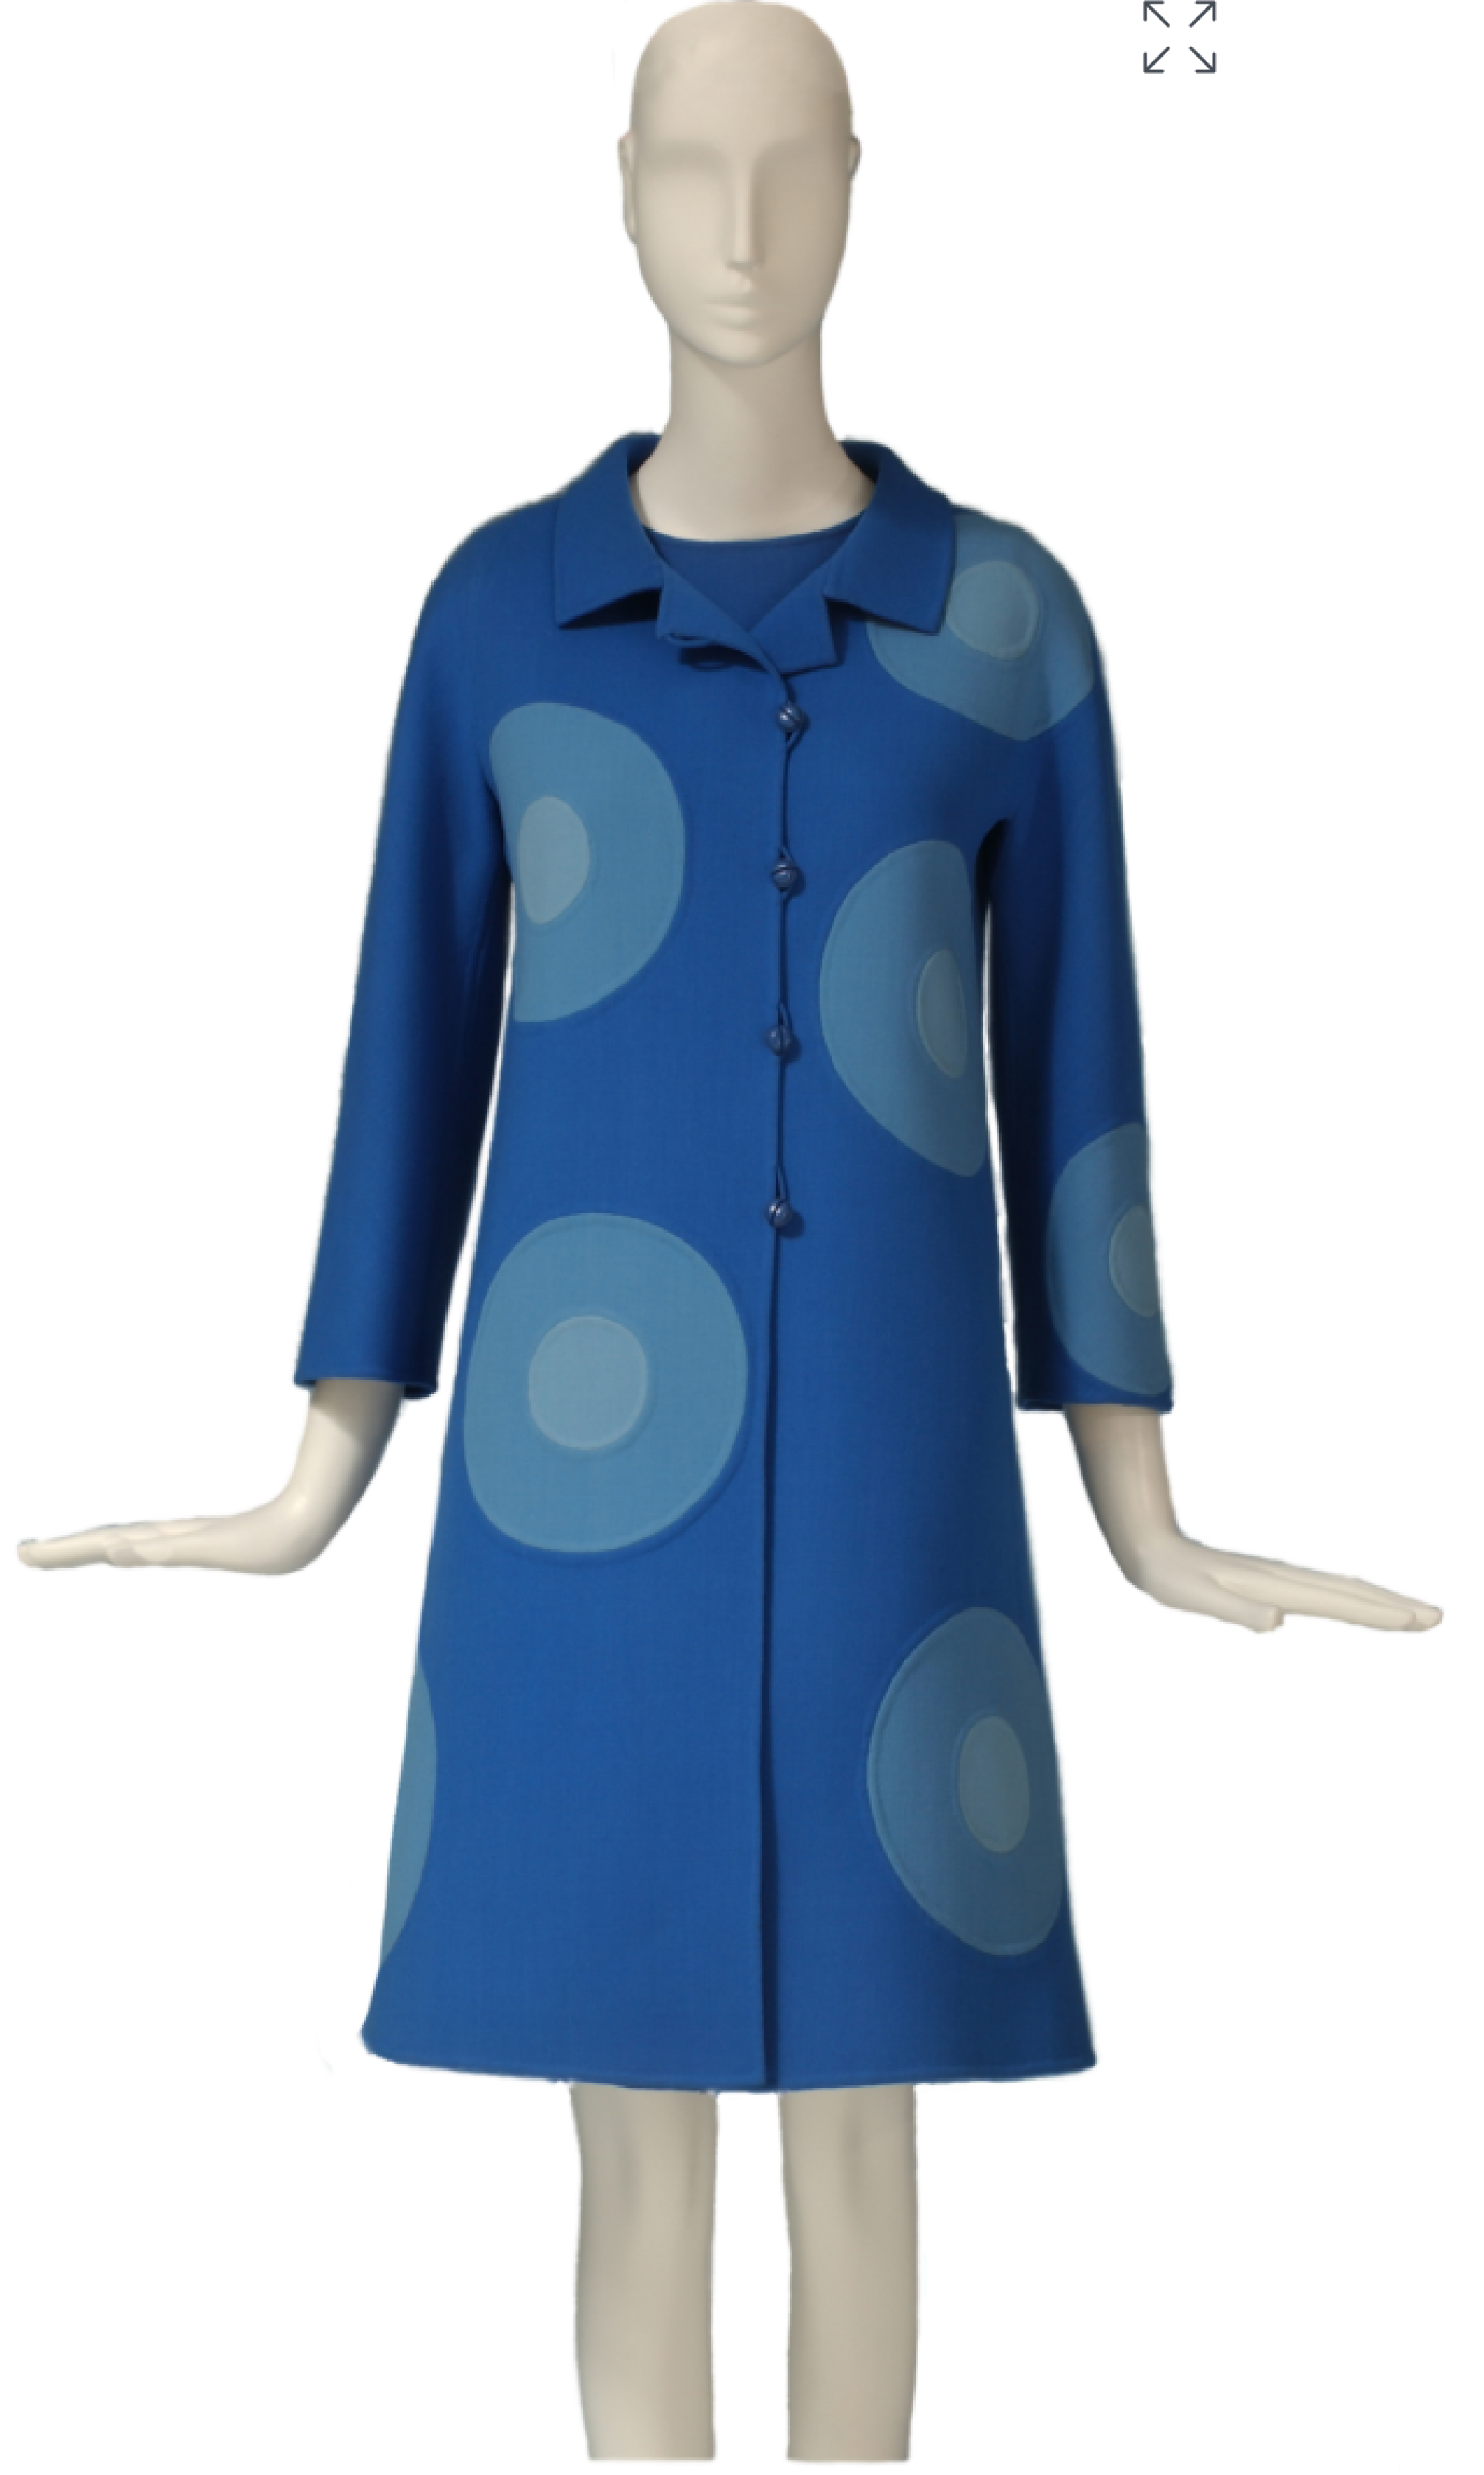 Front view of 1968 Mila Schön set containing a long sleeve, above the knee blue double faced wool coat and dress set. The coat has large concentric circles in two complimentary shades of blue.